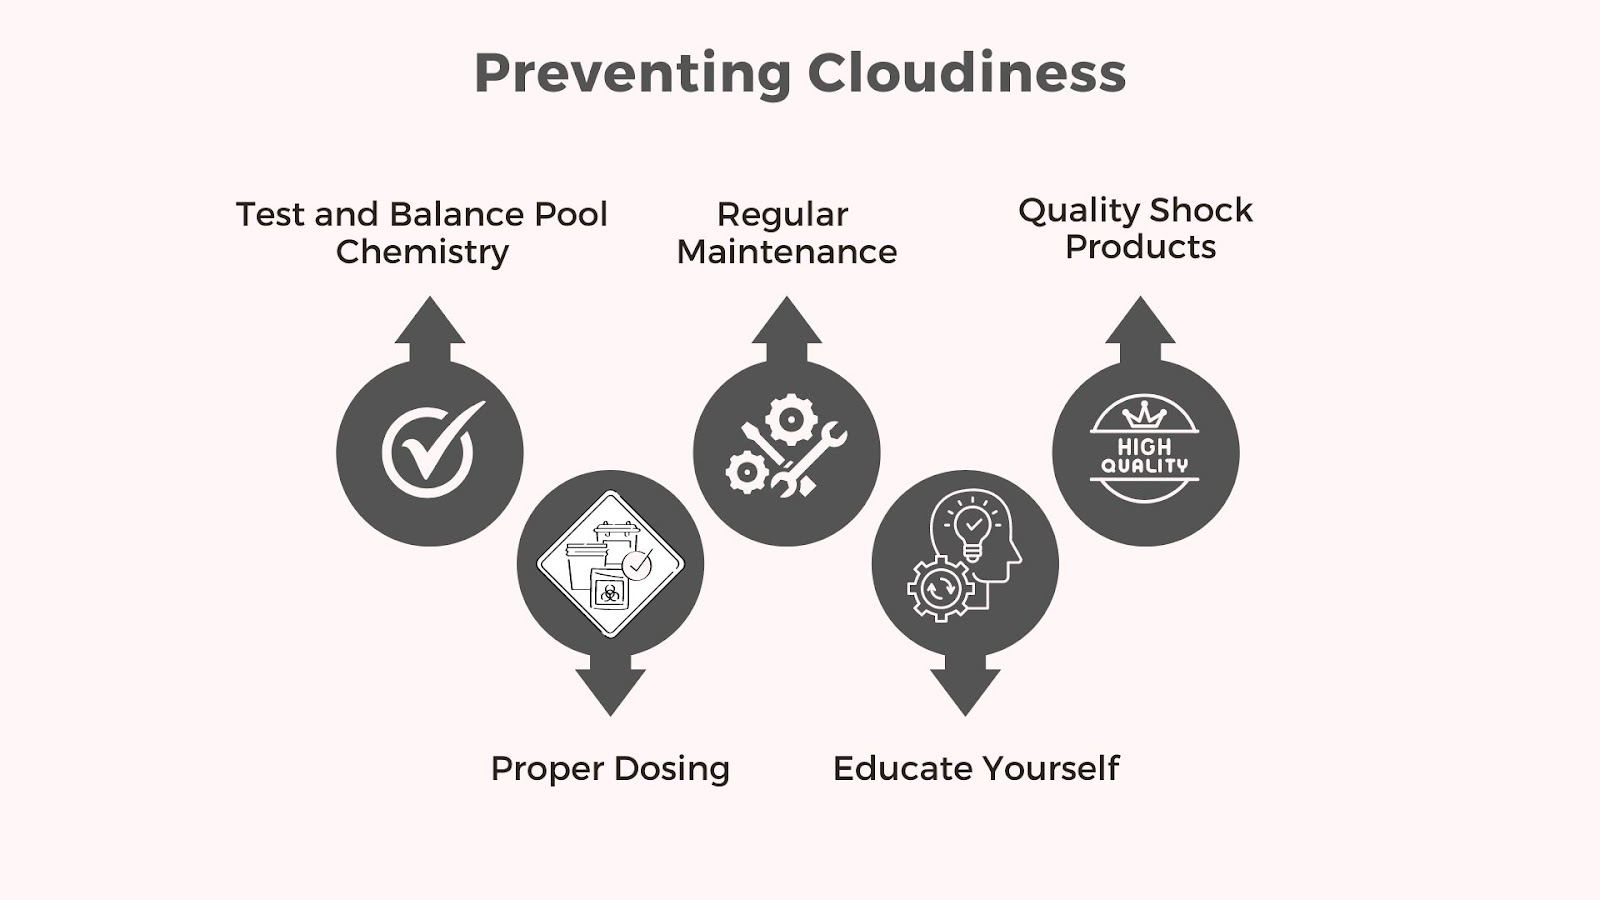 Addressing and Preventing Cloudiness